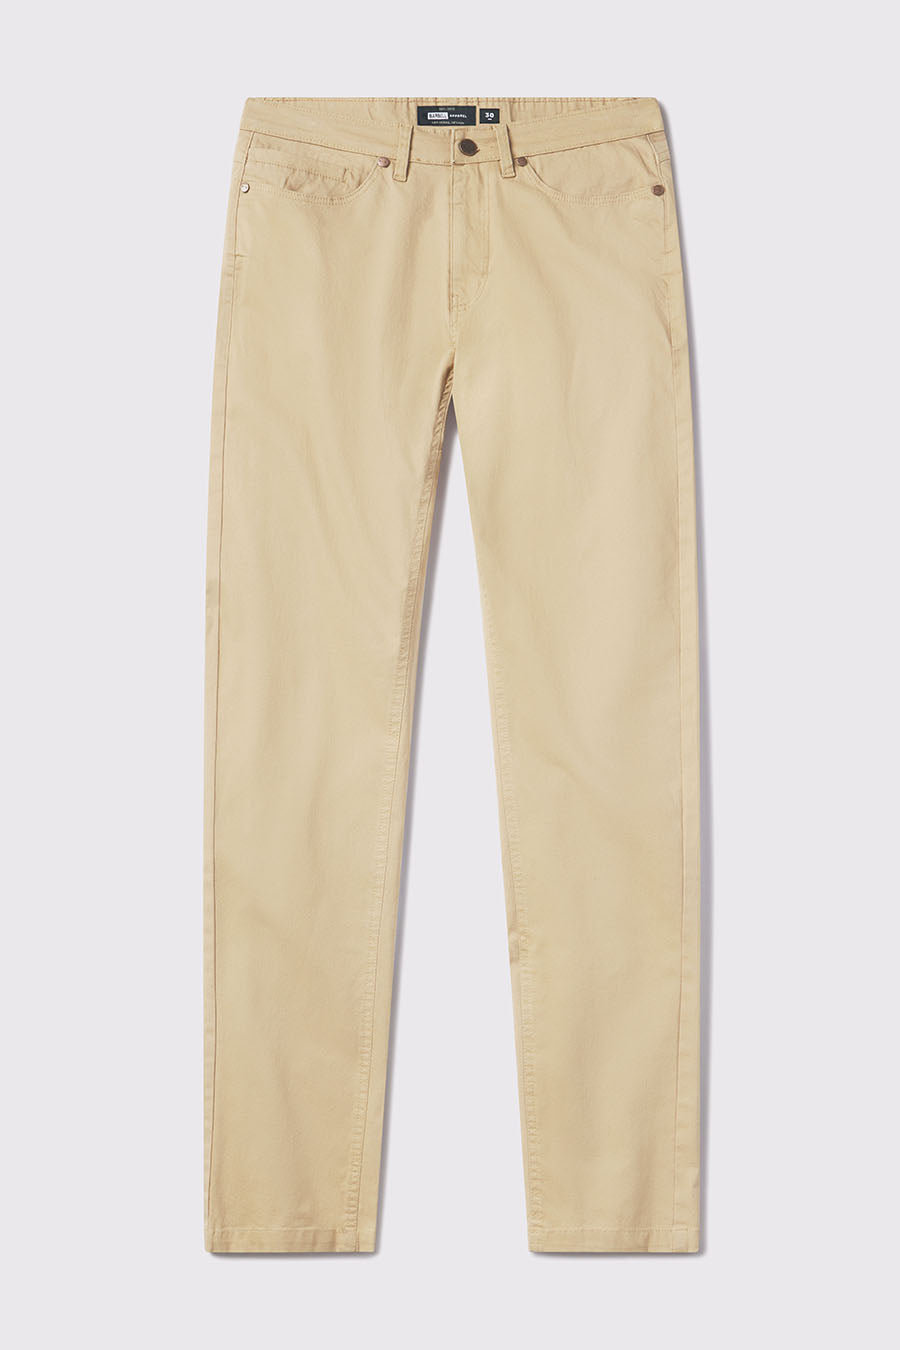 Athletic Fit Chino Pant 2.0 - Khaki - photo from front flat lay #color_khaki